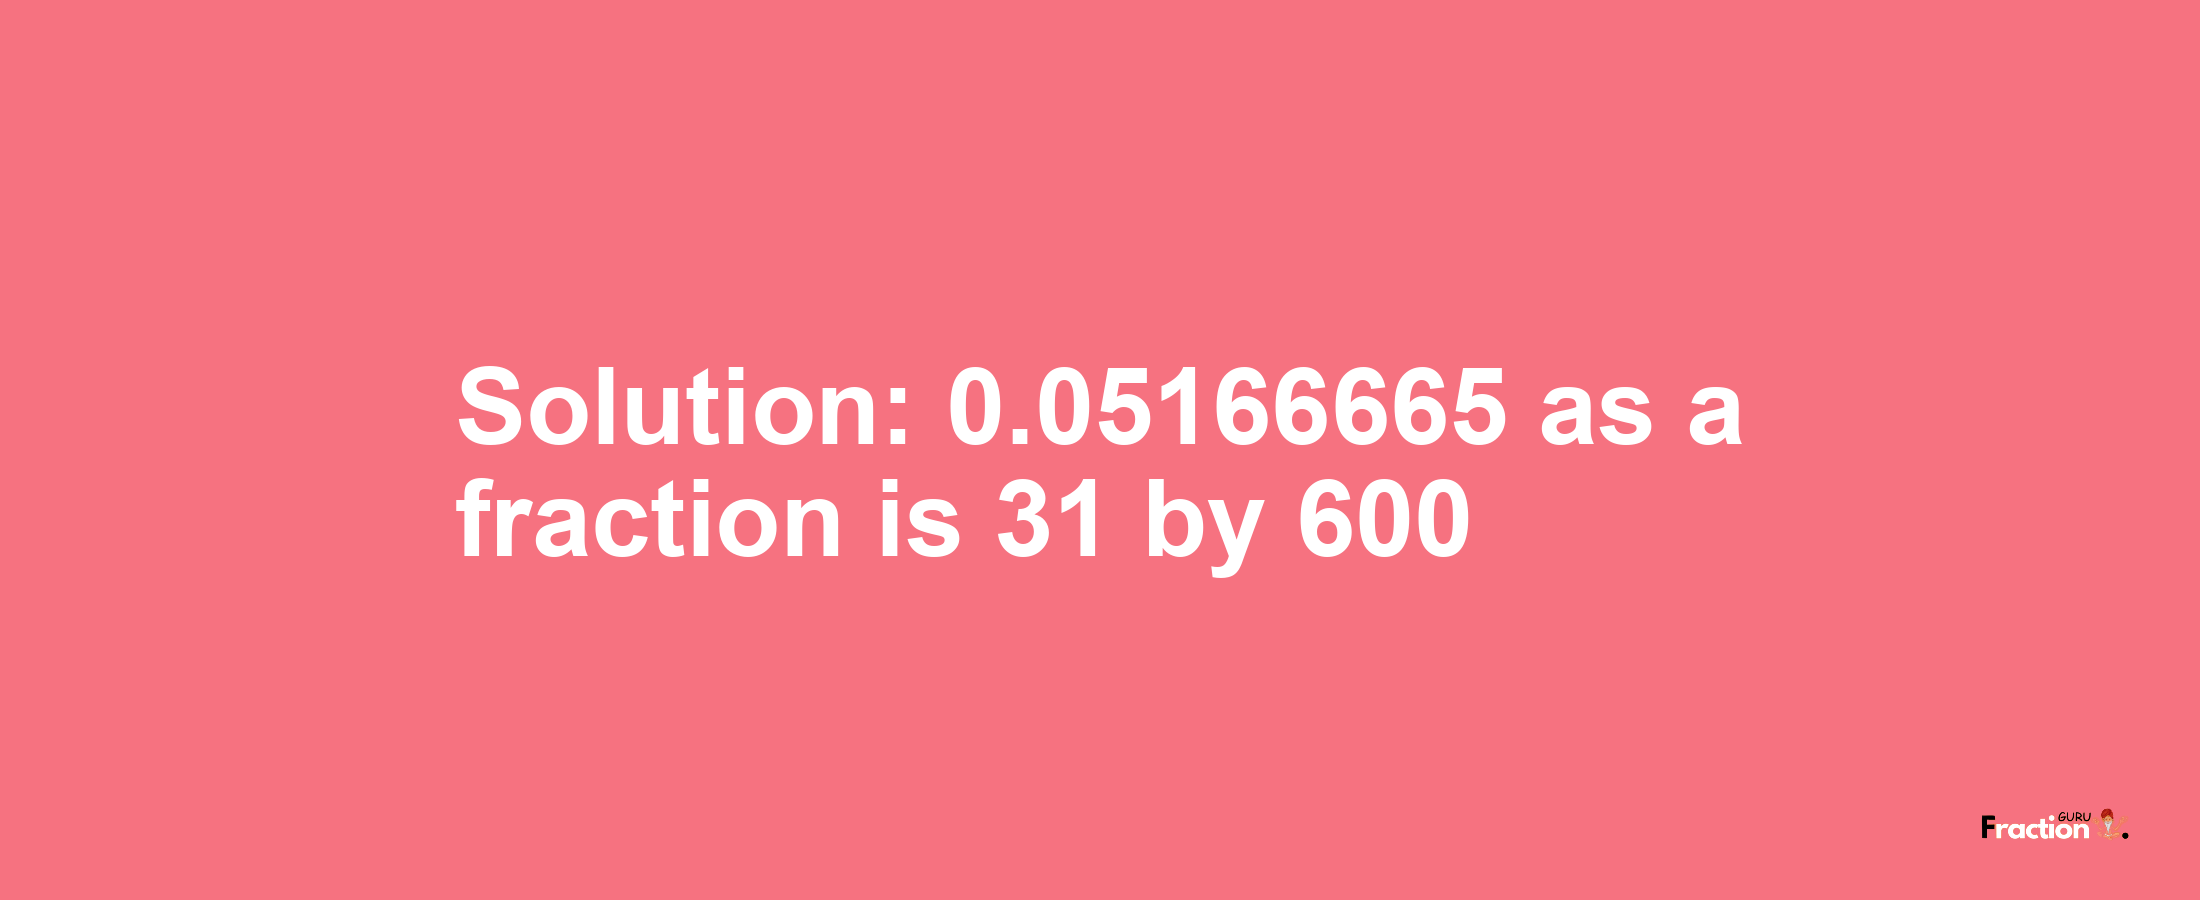 Solution:0.05166665 as a fraction is 31/600